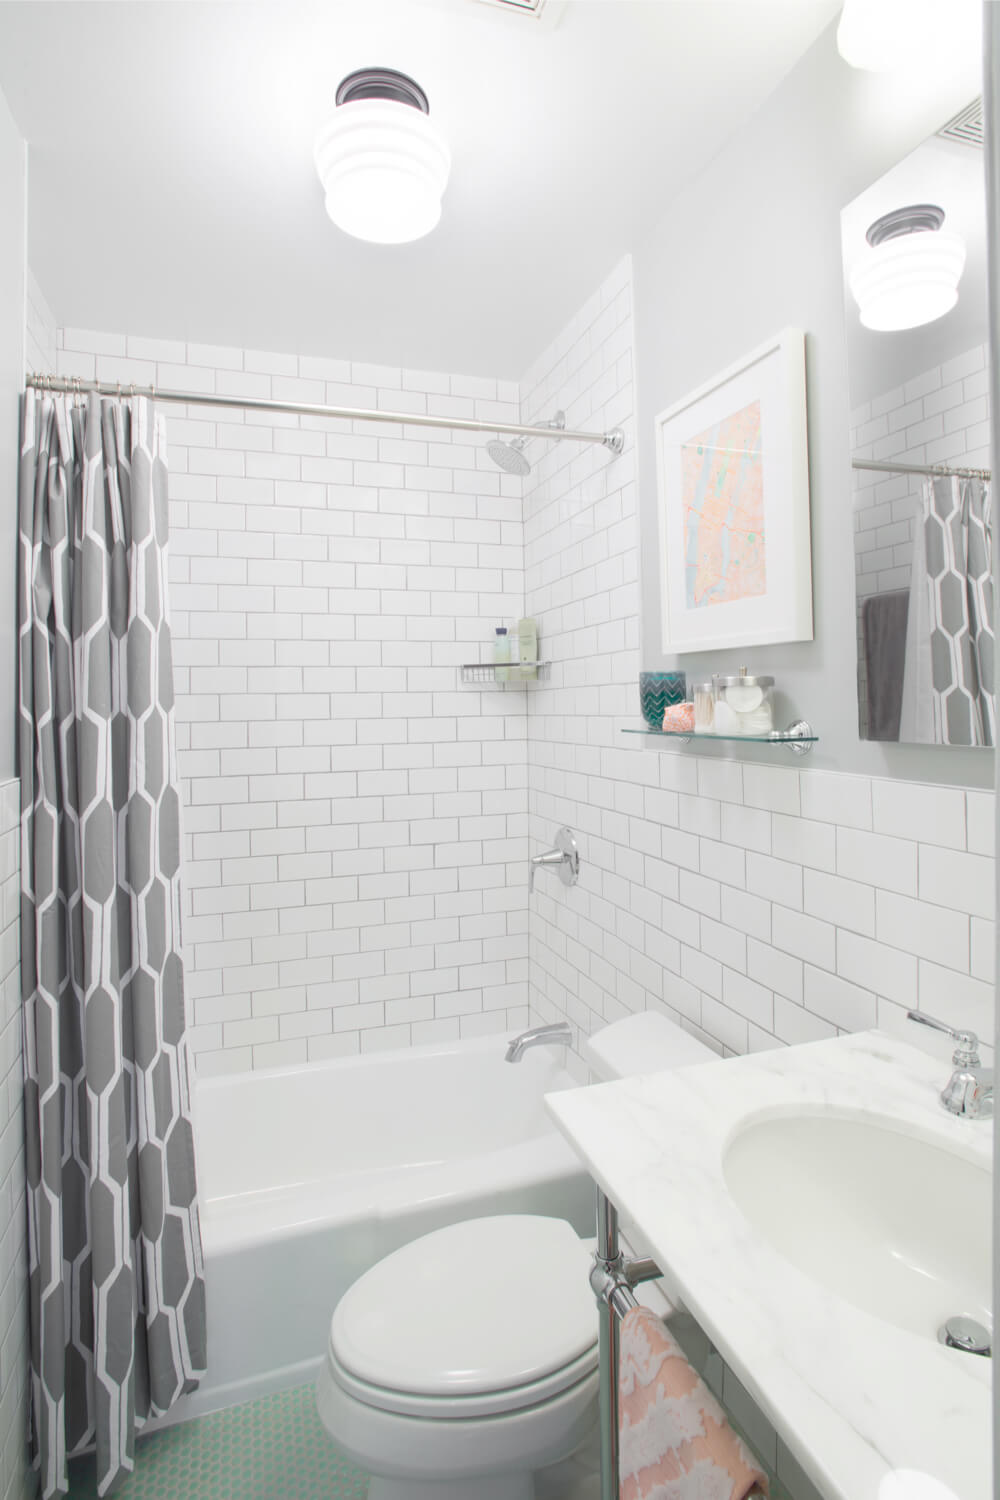 bathroom with white subway wall tiles and nickel fixtures and light green floor tiles and console basin sink after renovation